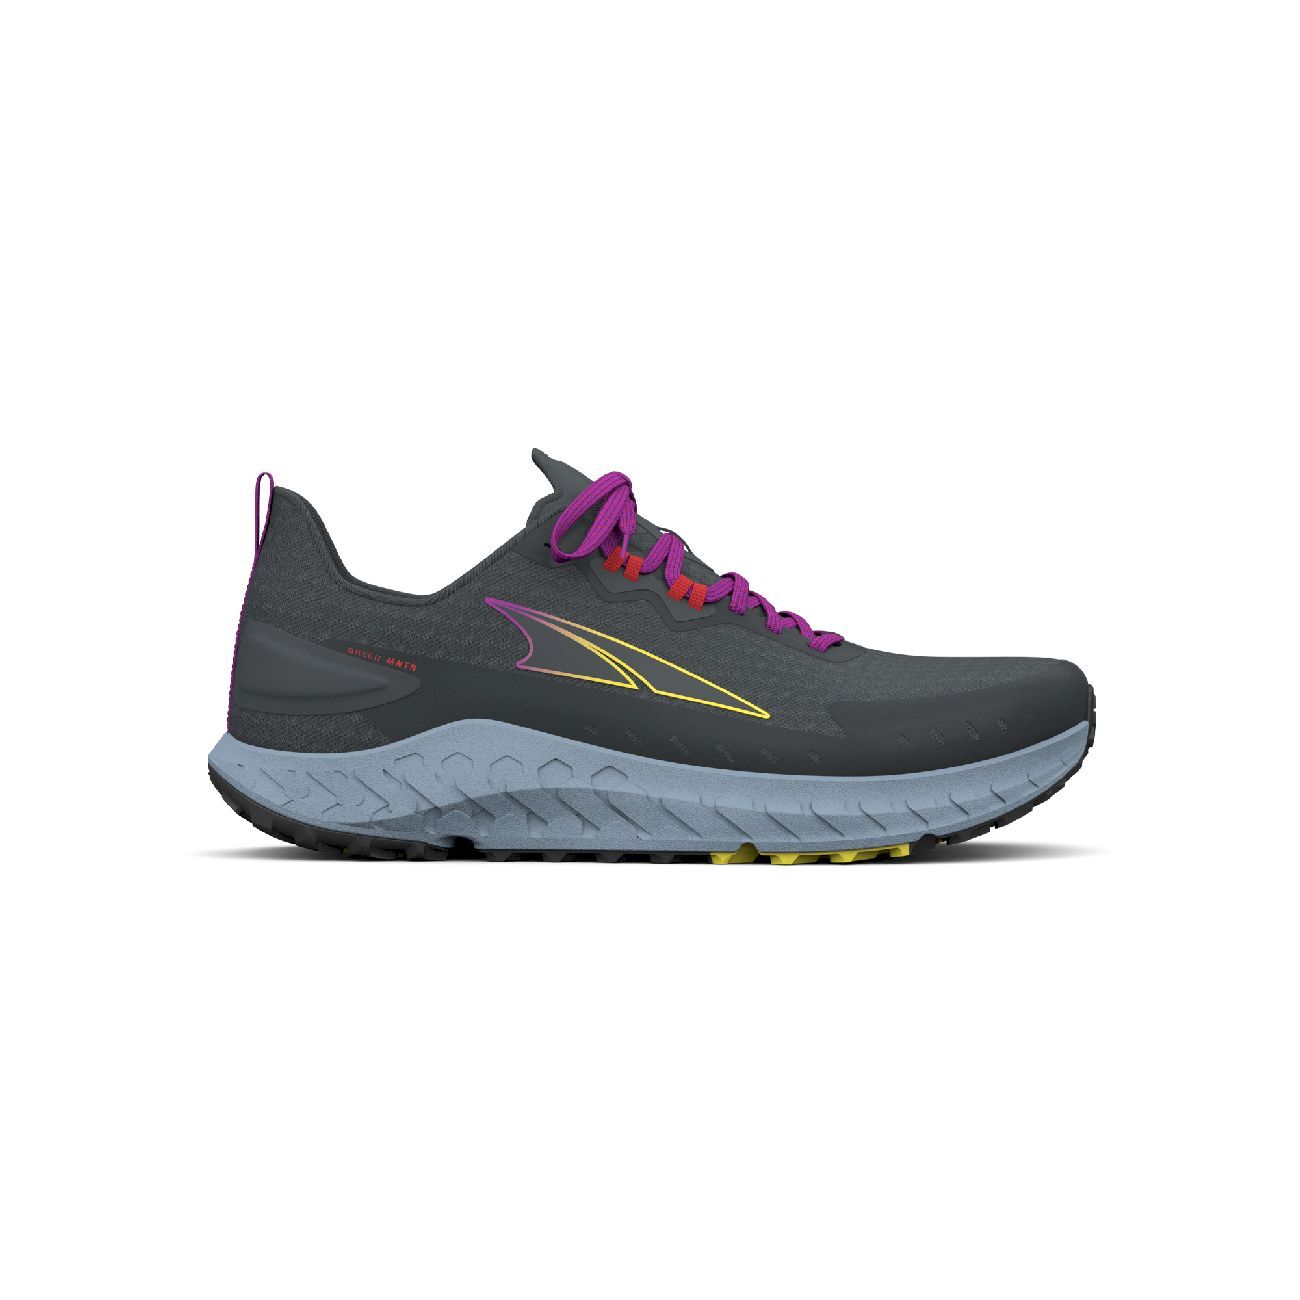 Altra Outroad - Trail running shoes - Women's